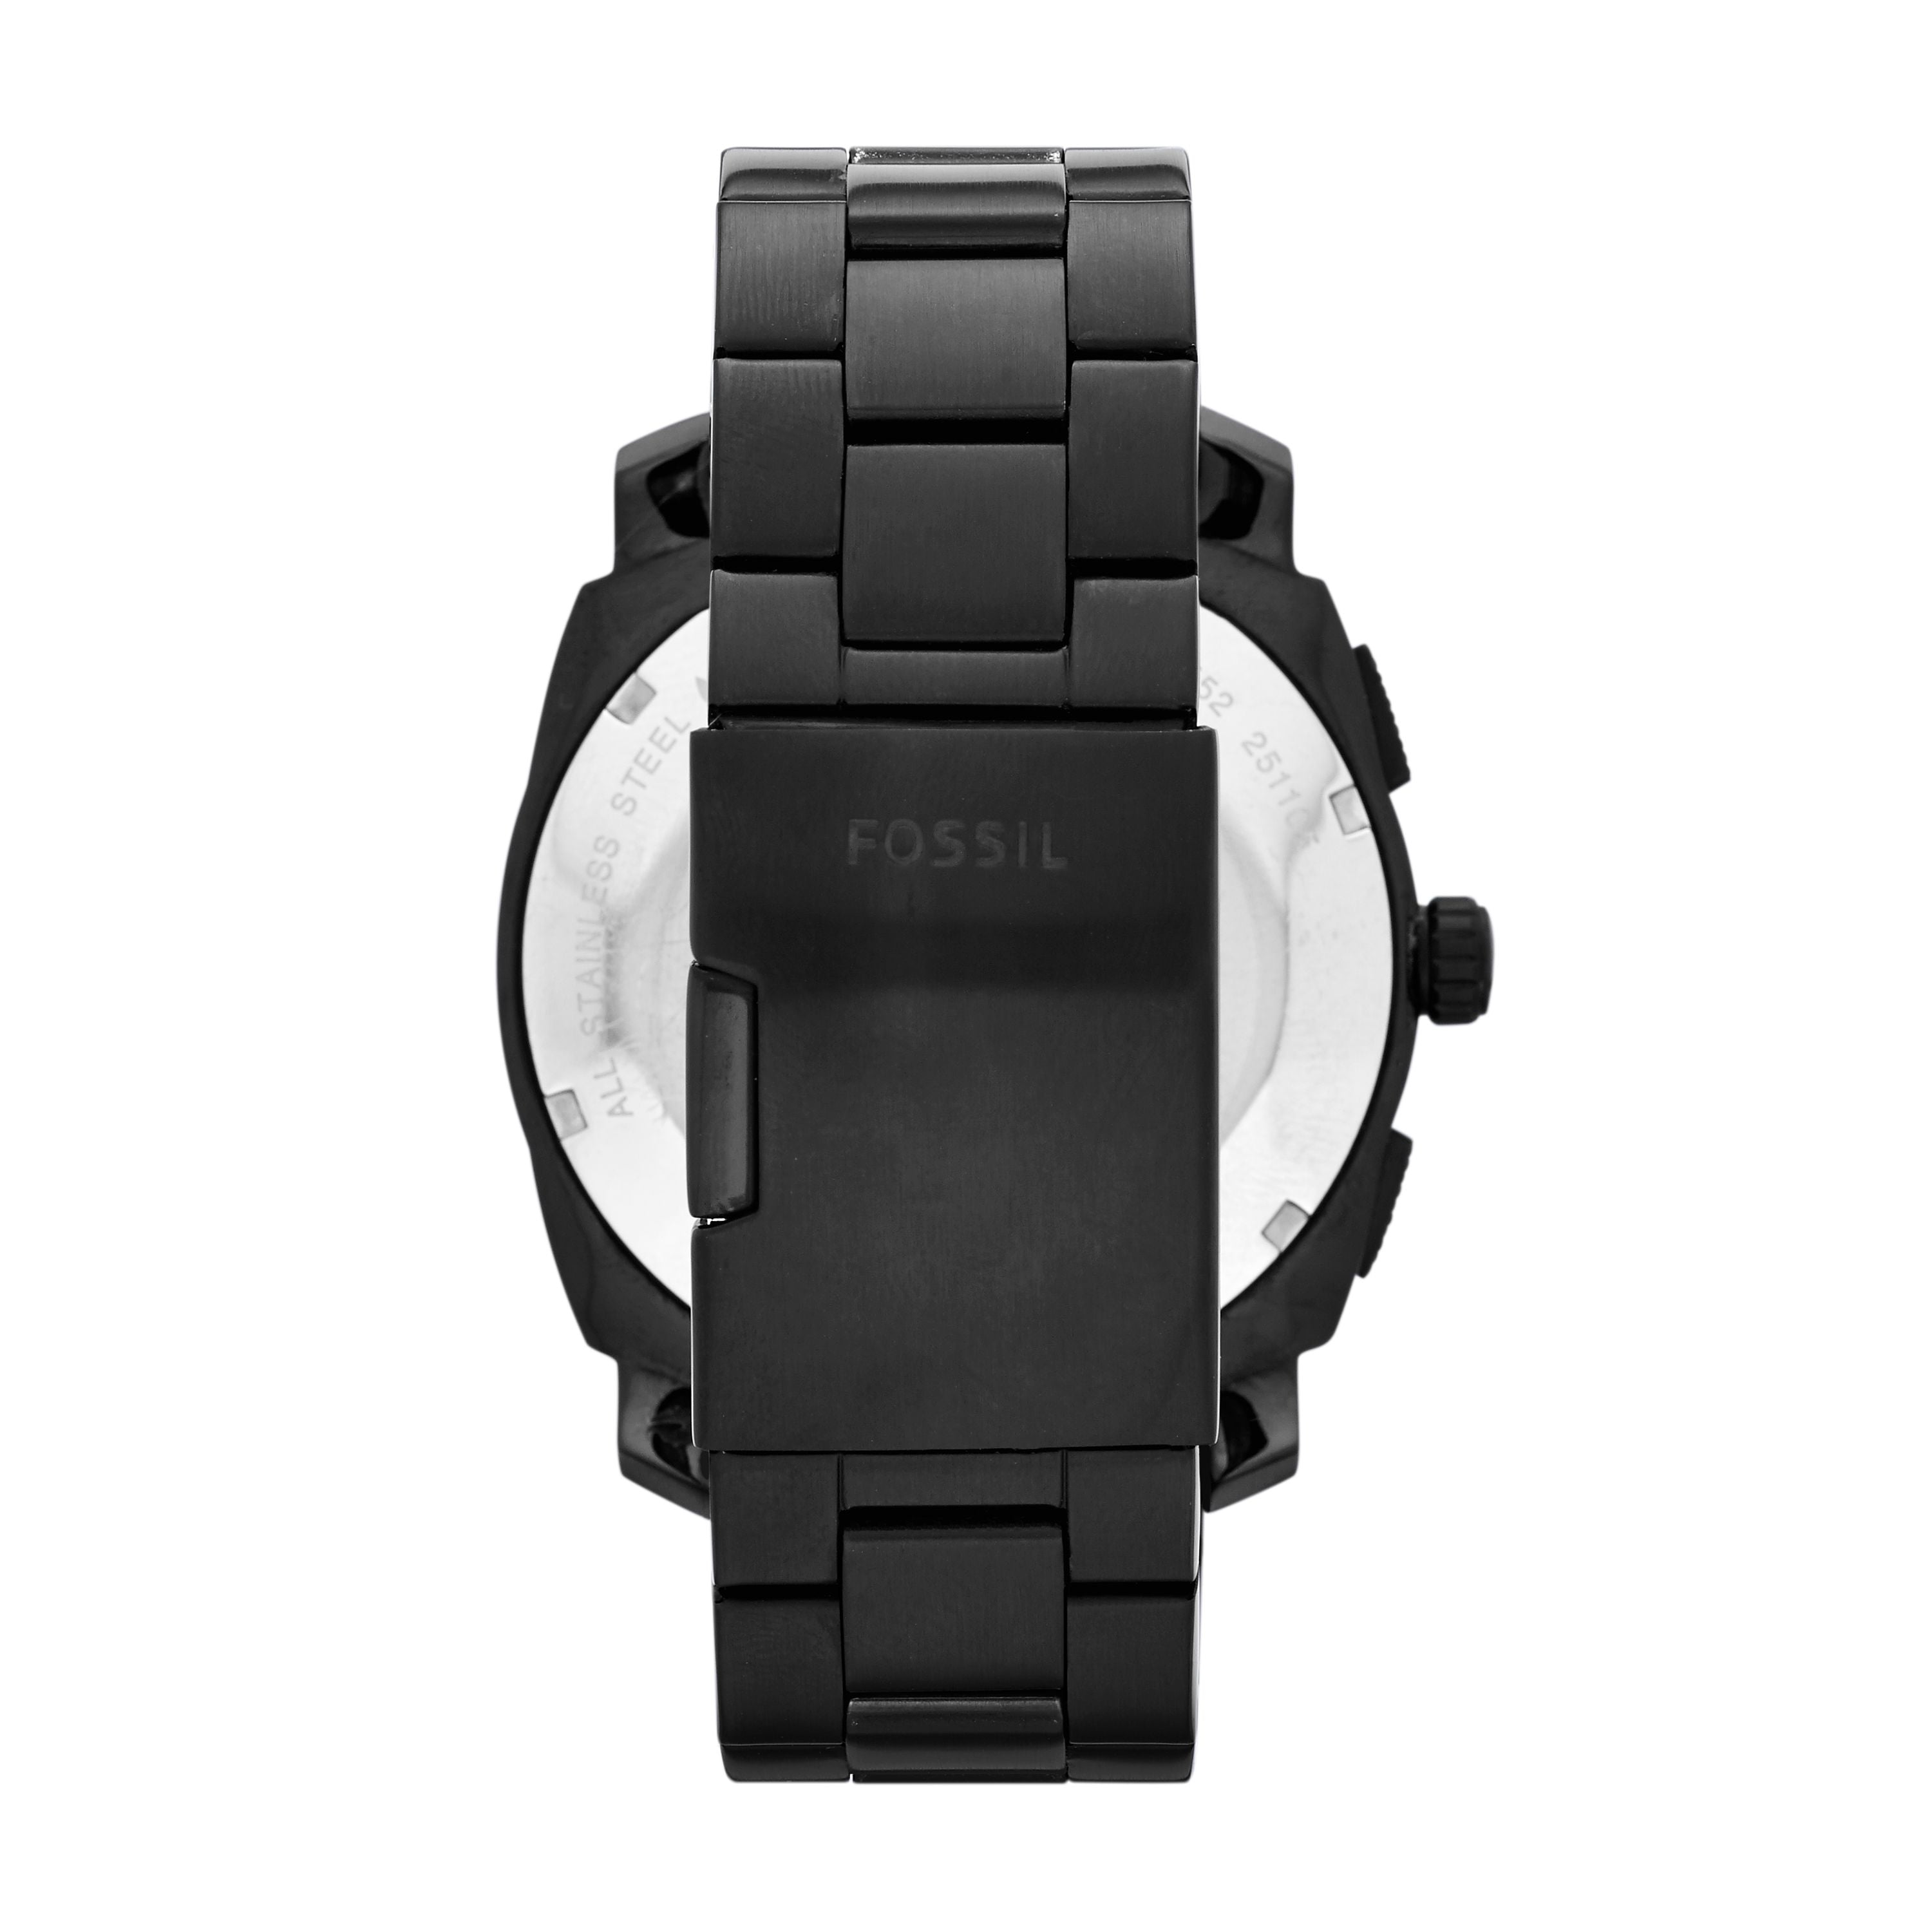 Fossil Men's Machine Black Stainless Steel Chronograph Watch 